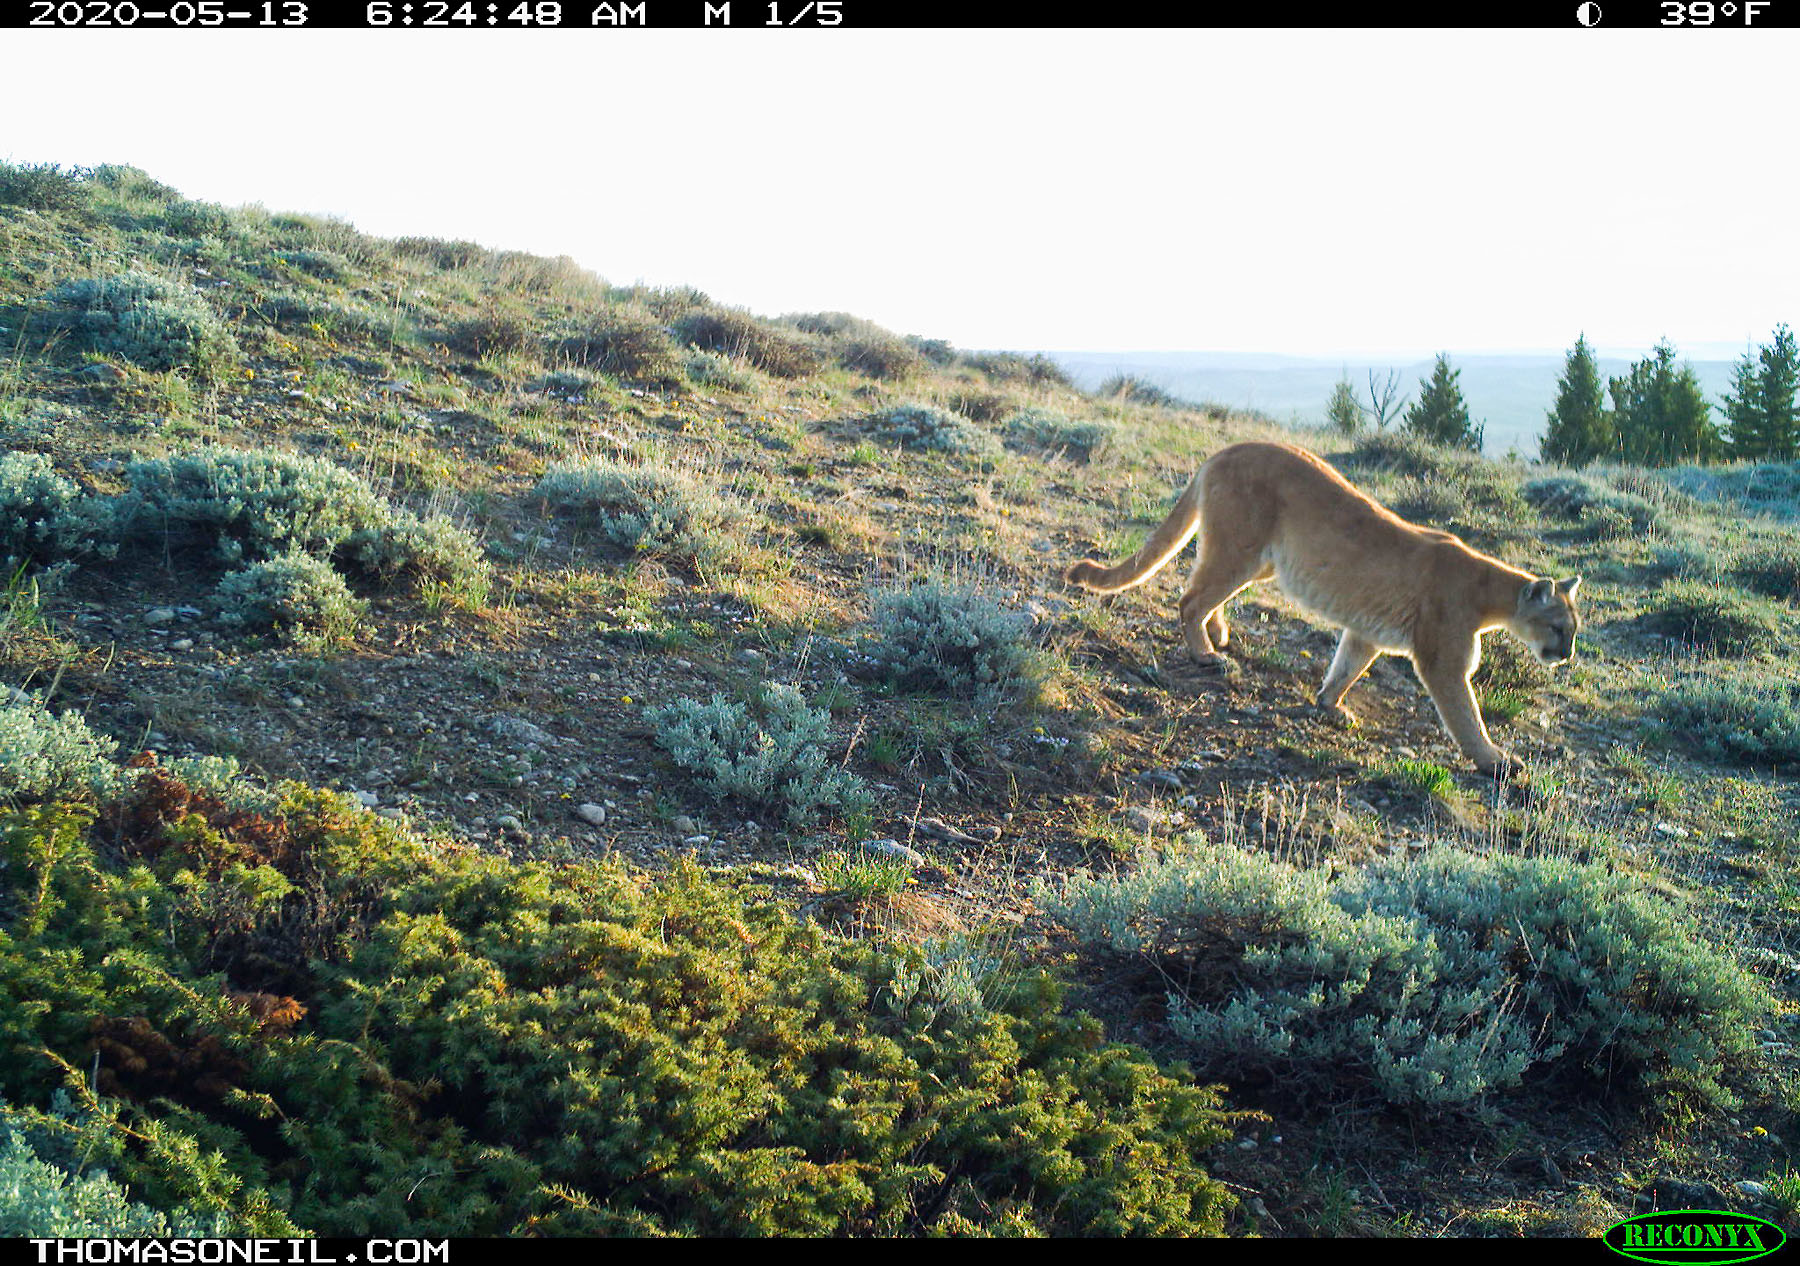 Mountain Lion near Luther, MT, 2020.  Click for next photo.